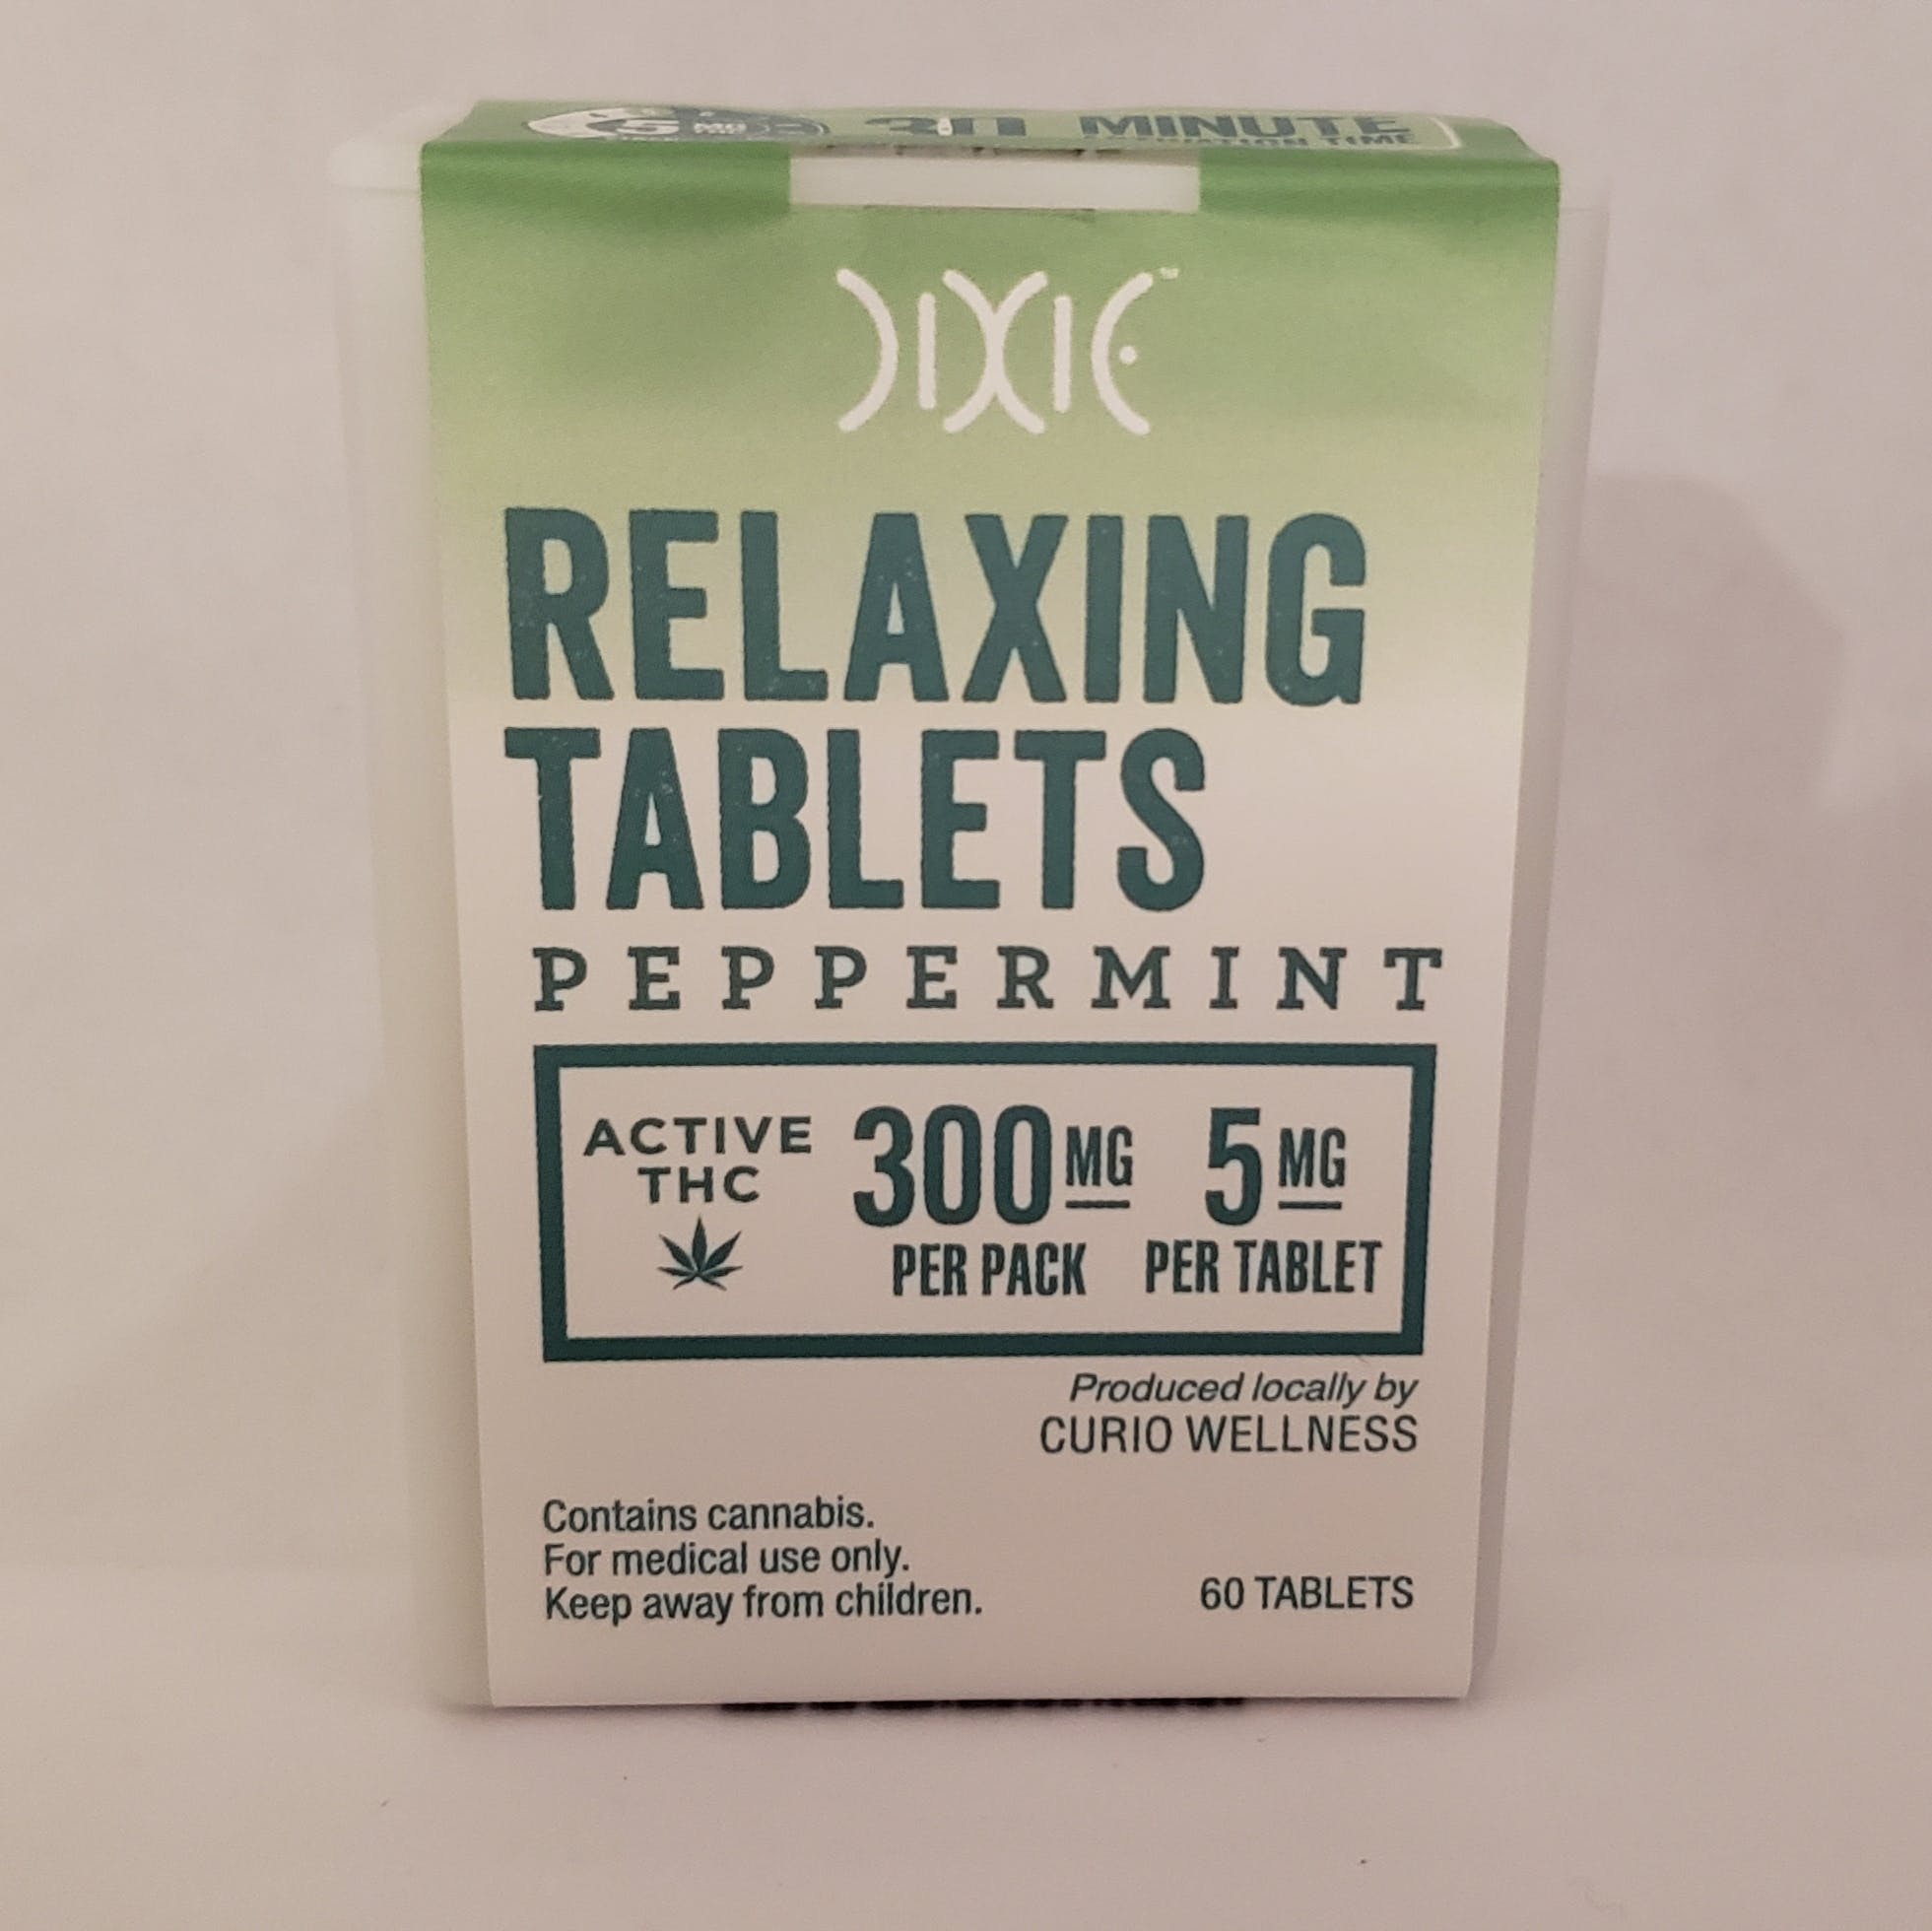 edible-dixie-relaxing-peppermint-tablets-300mg-thc